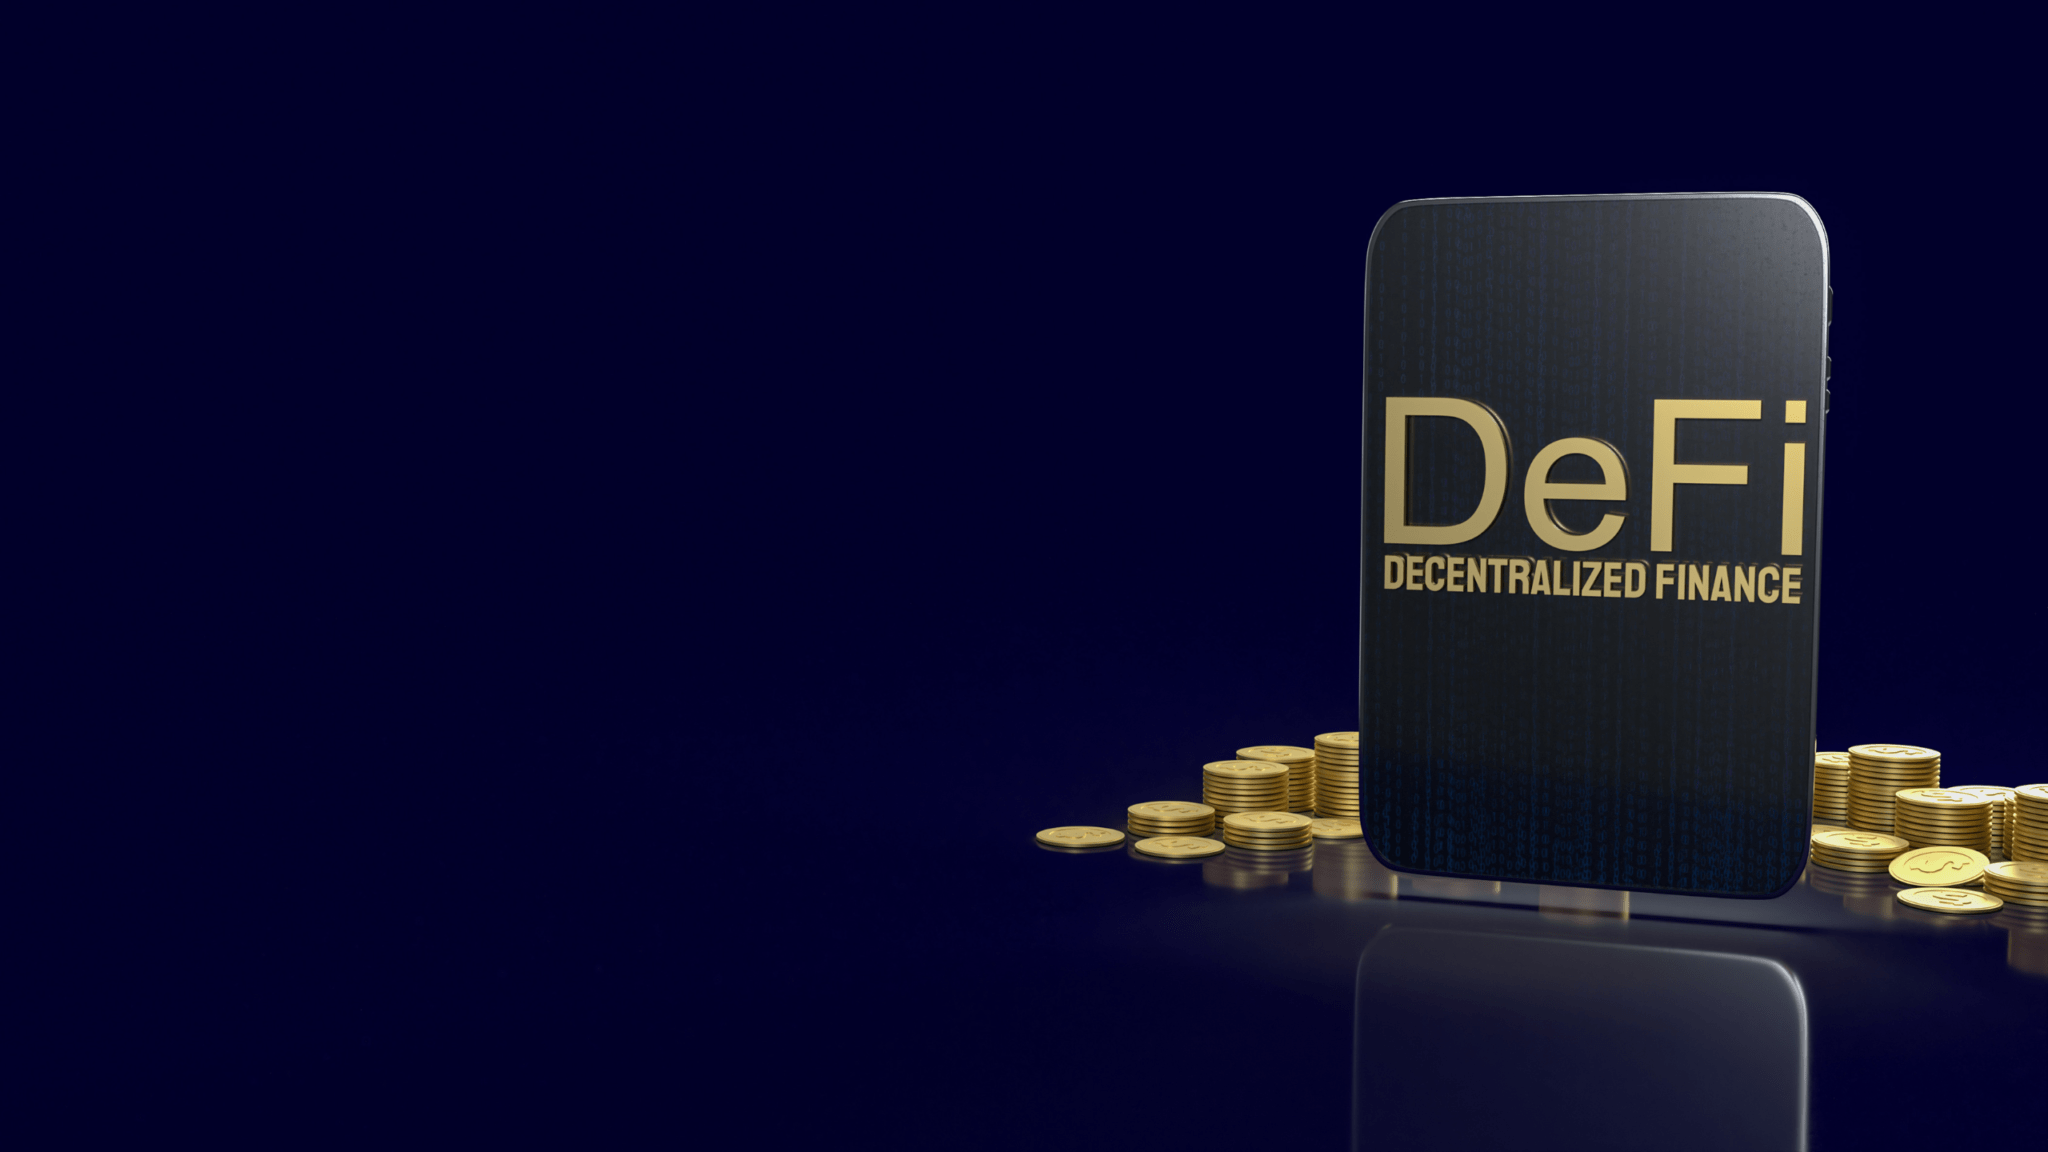 DeFi 2.0, the new wave of Decentralized Finance